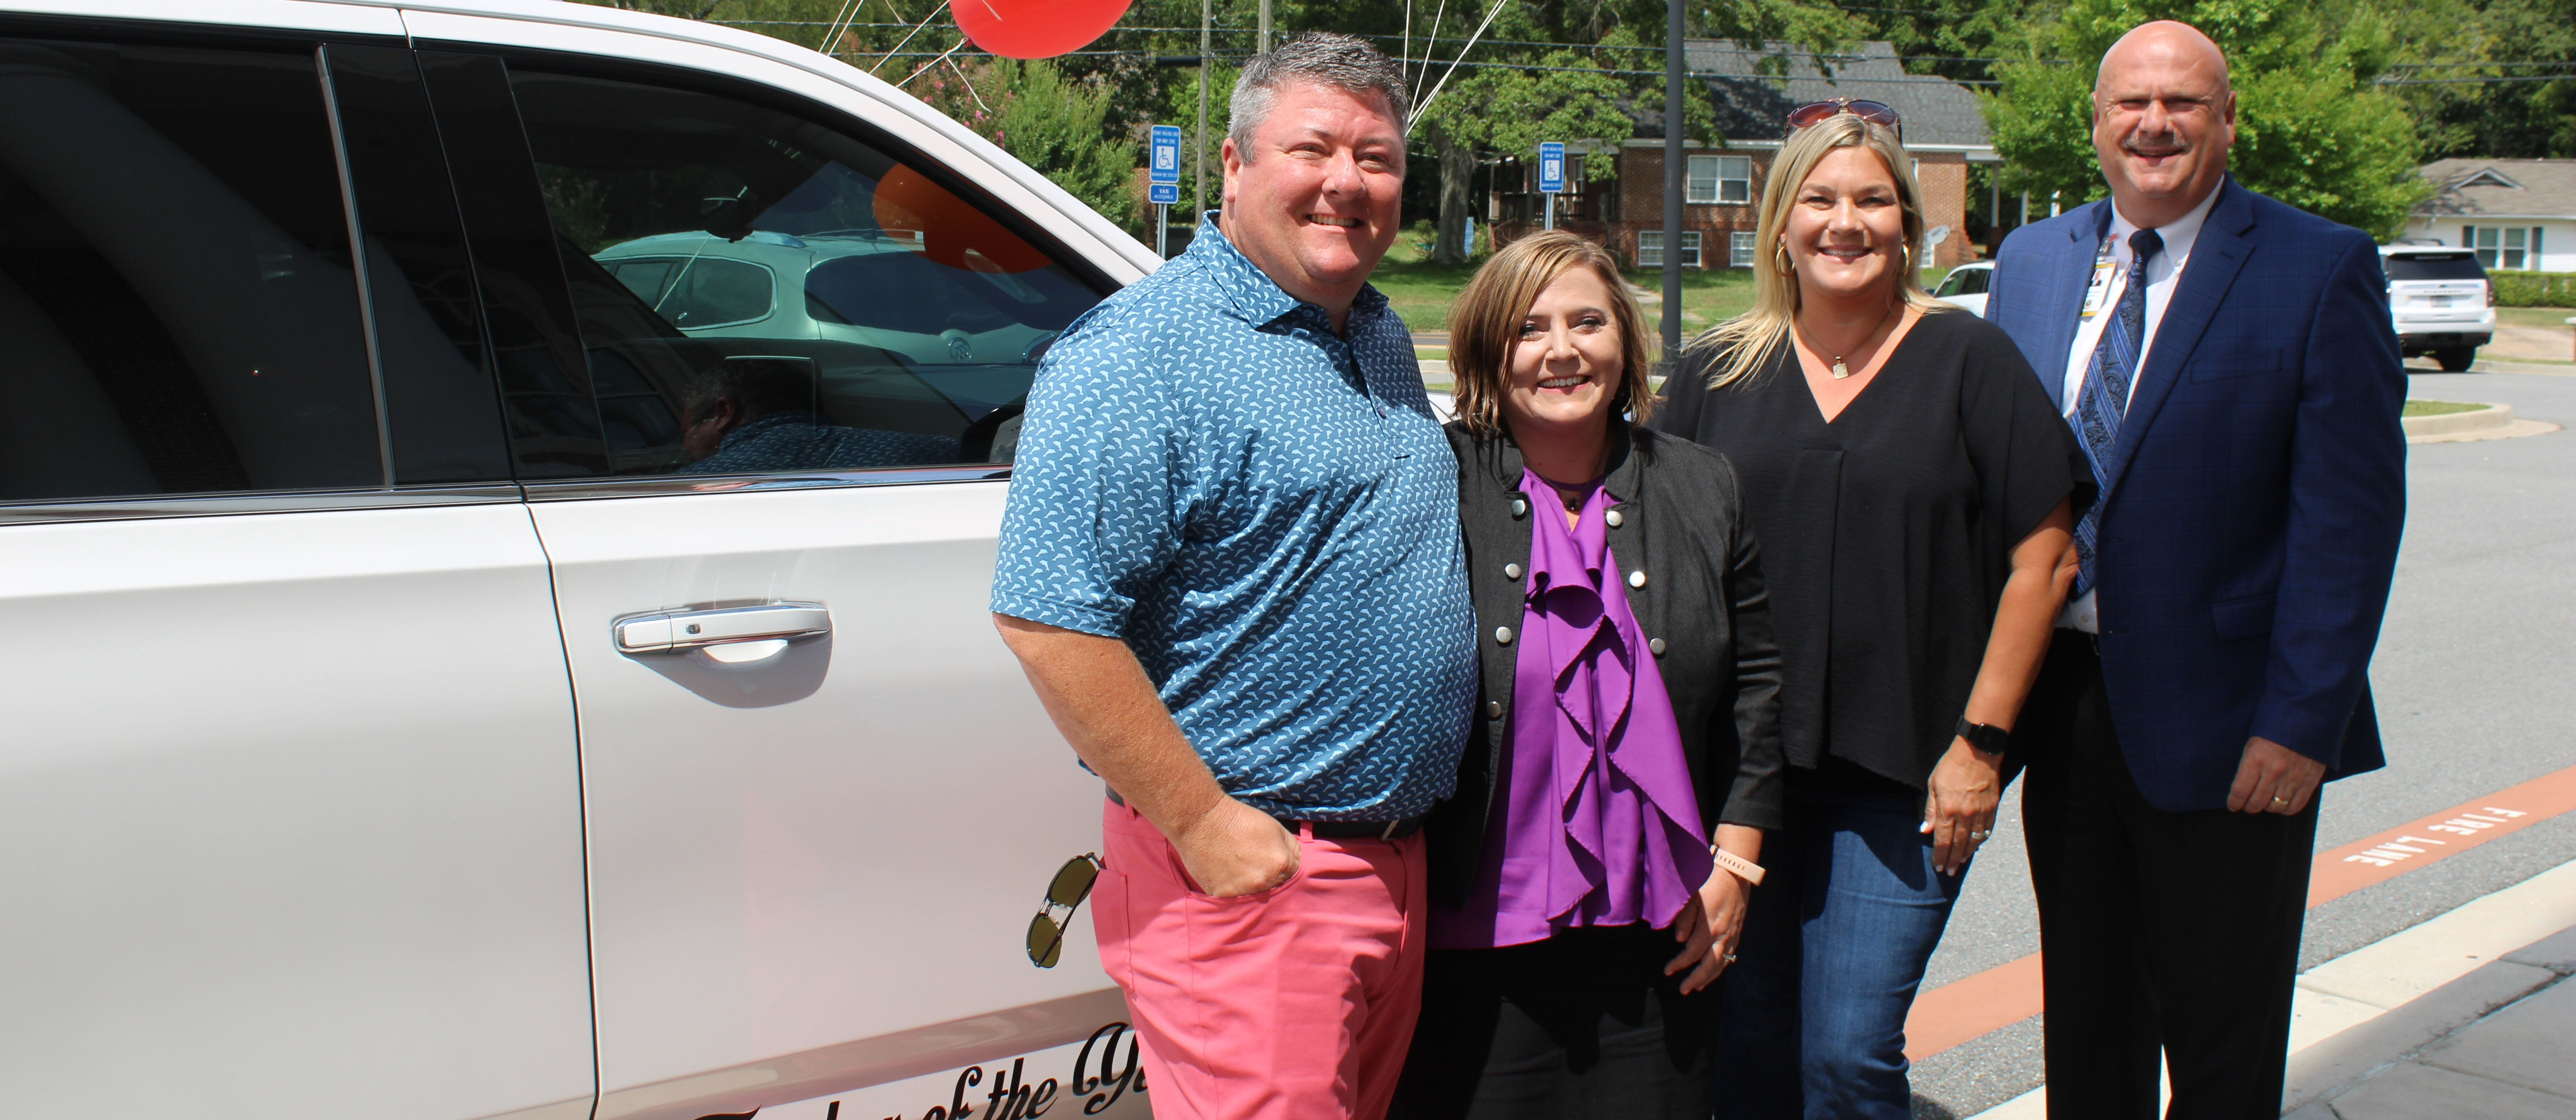 Monroe County Teacher of the Year Amanda Holloway posing in front of her new Chevy Tahoe with Supt. Mike Hickman and the owners of Volume Chevrolet